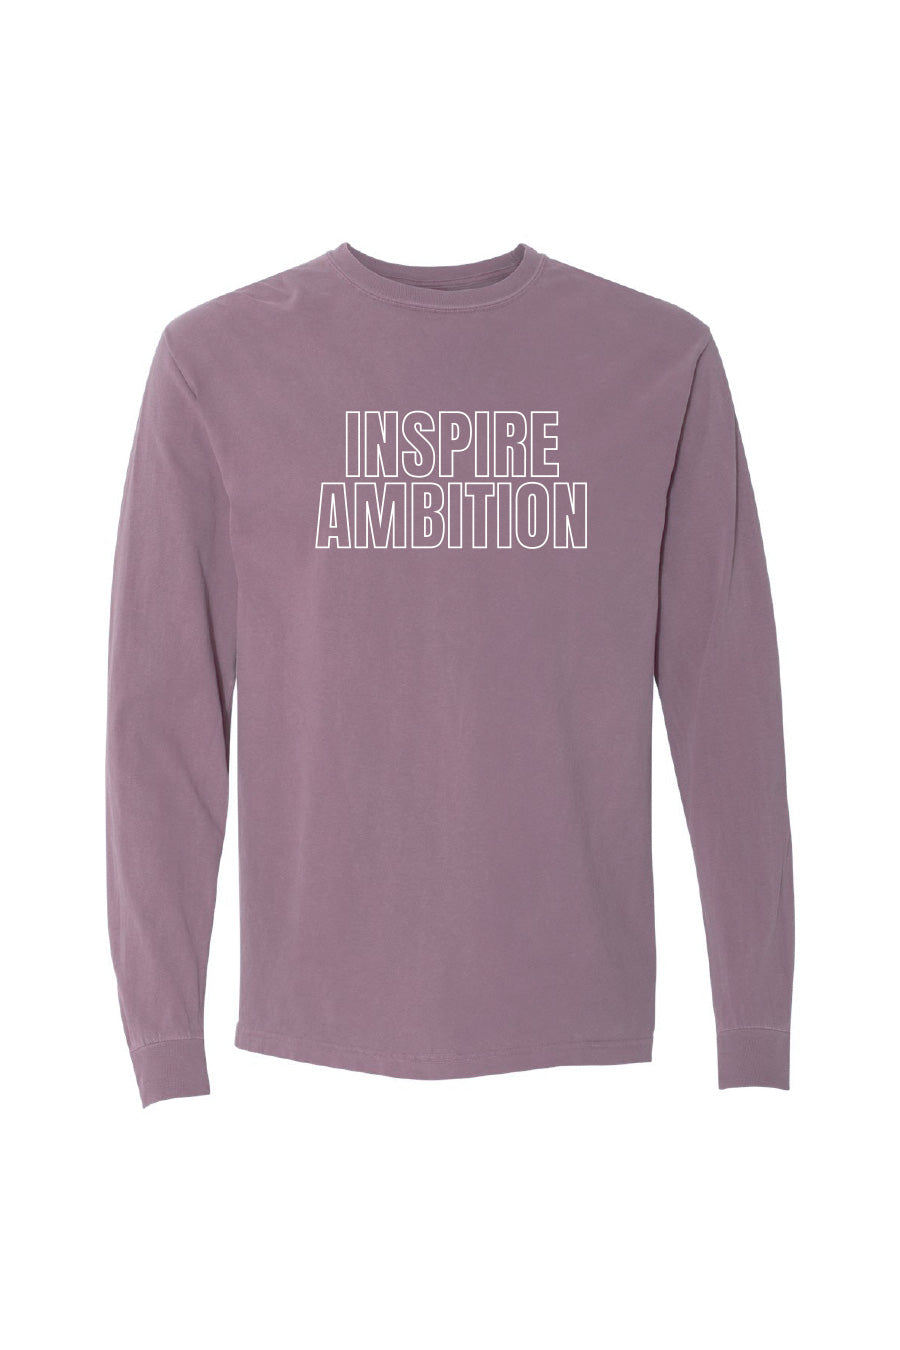 Berry Inspire Ambition 125th Anniversary Long Sleeve Tee